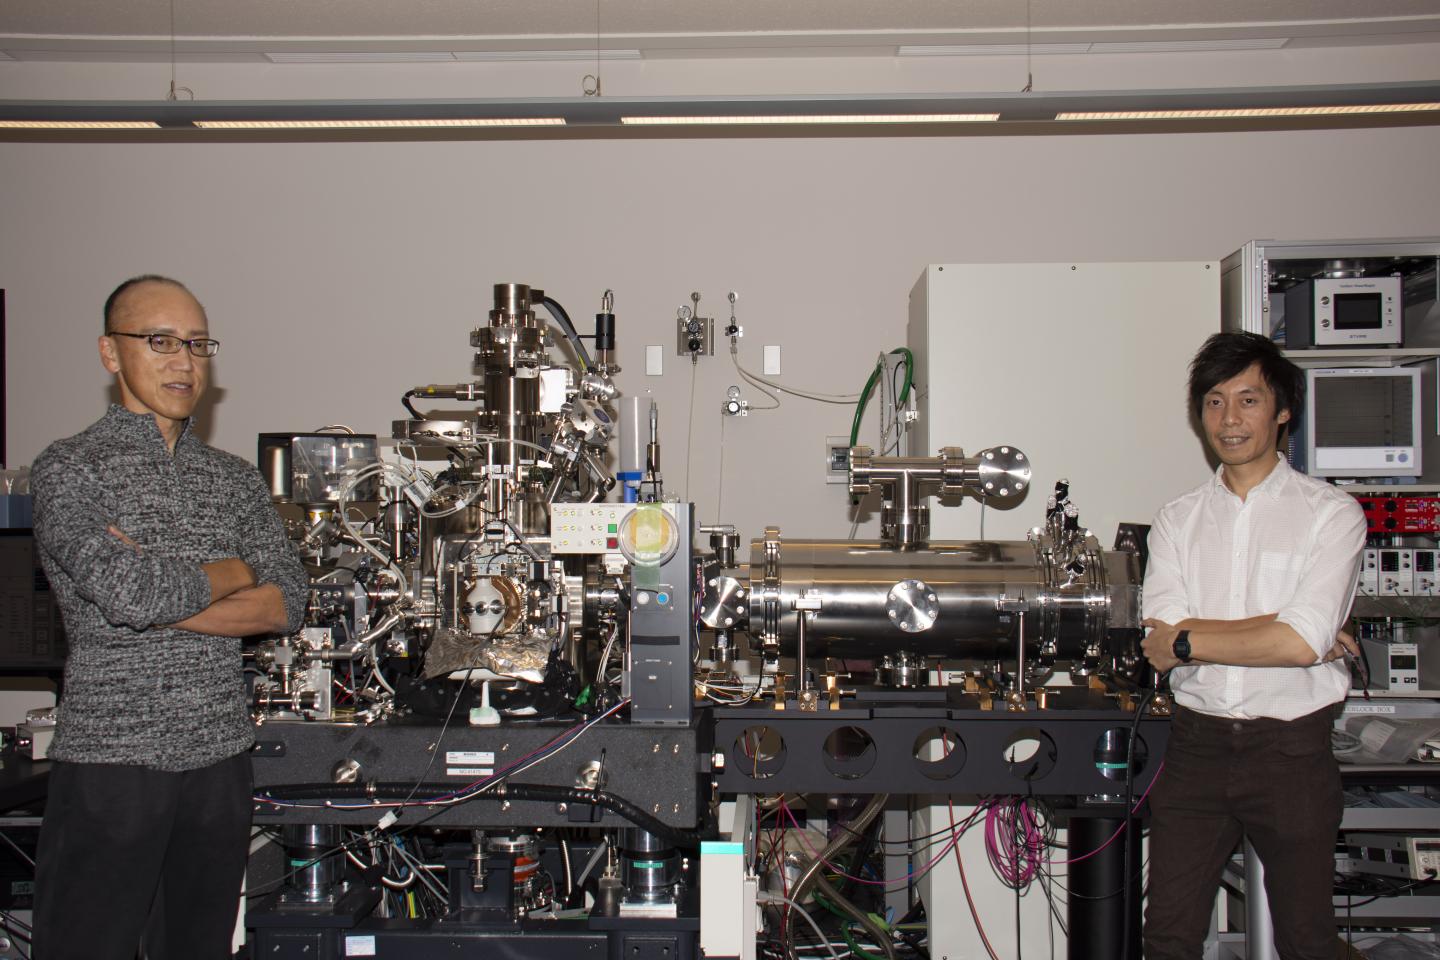 Cryo-Electron Microscope and Scientists